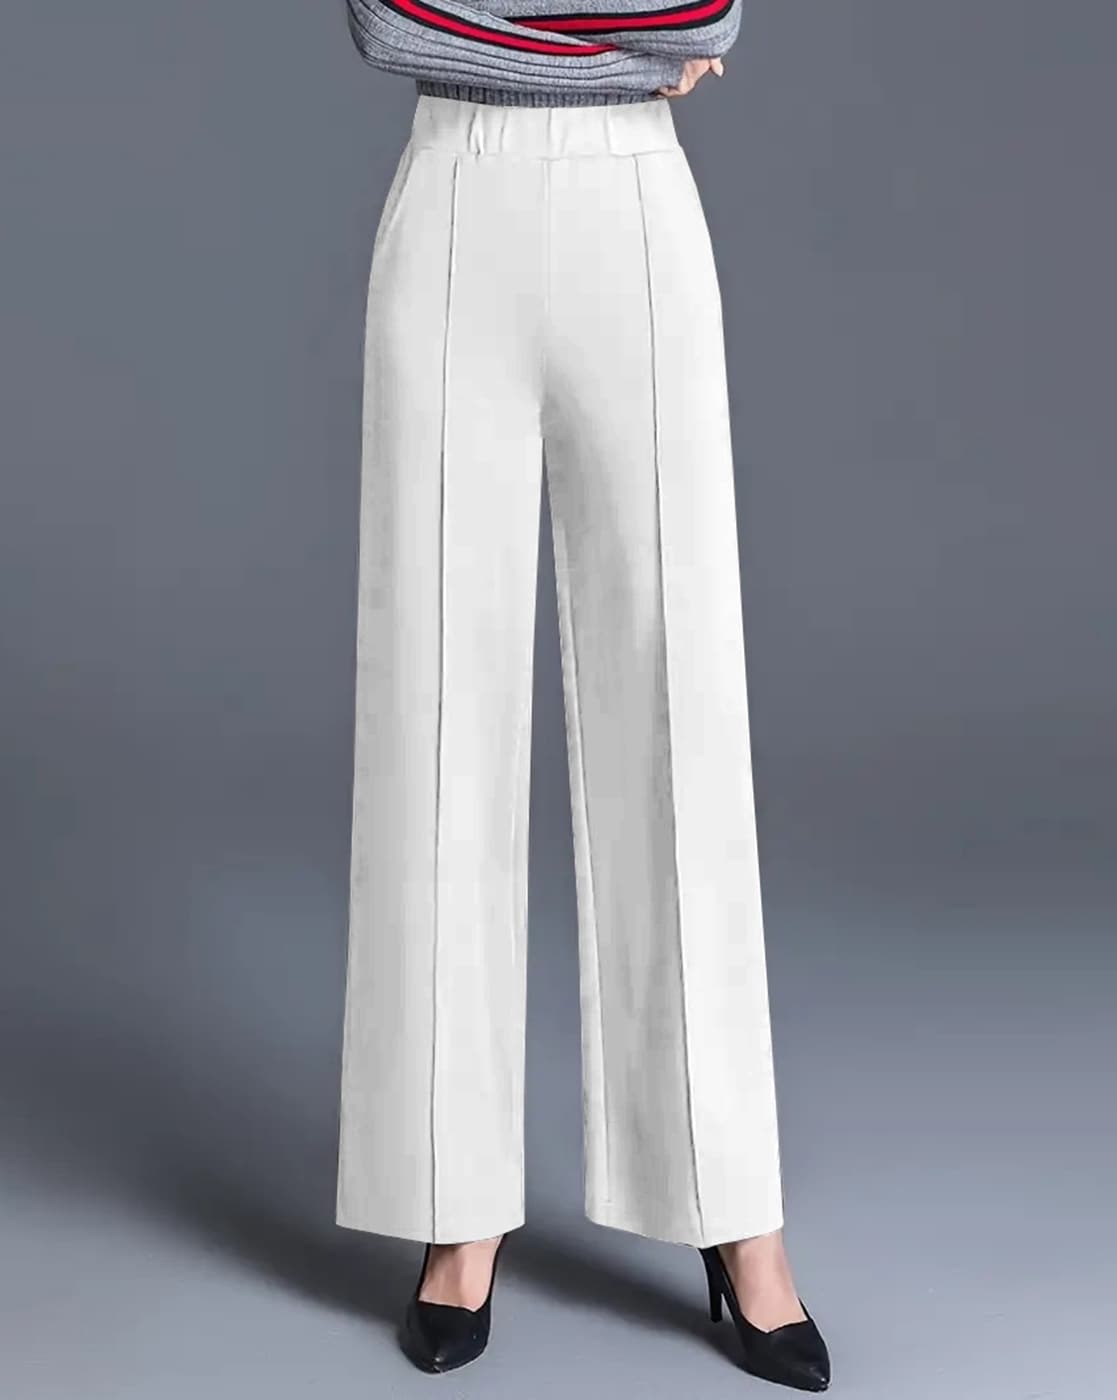 Buy SILKCHIC Regular Fit Ankle Length Elastic Waist Casual Bottom Wear  Palazzo Pants for Women at Amazon.in